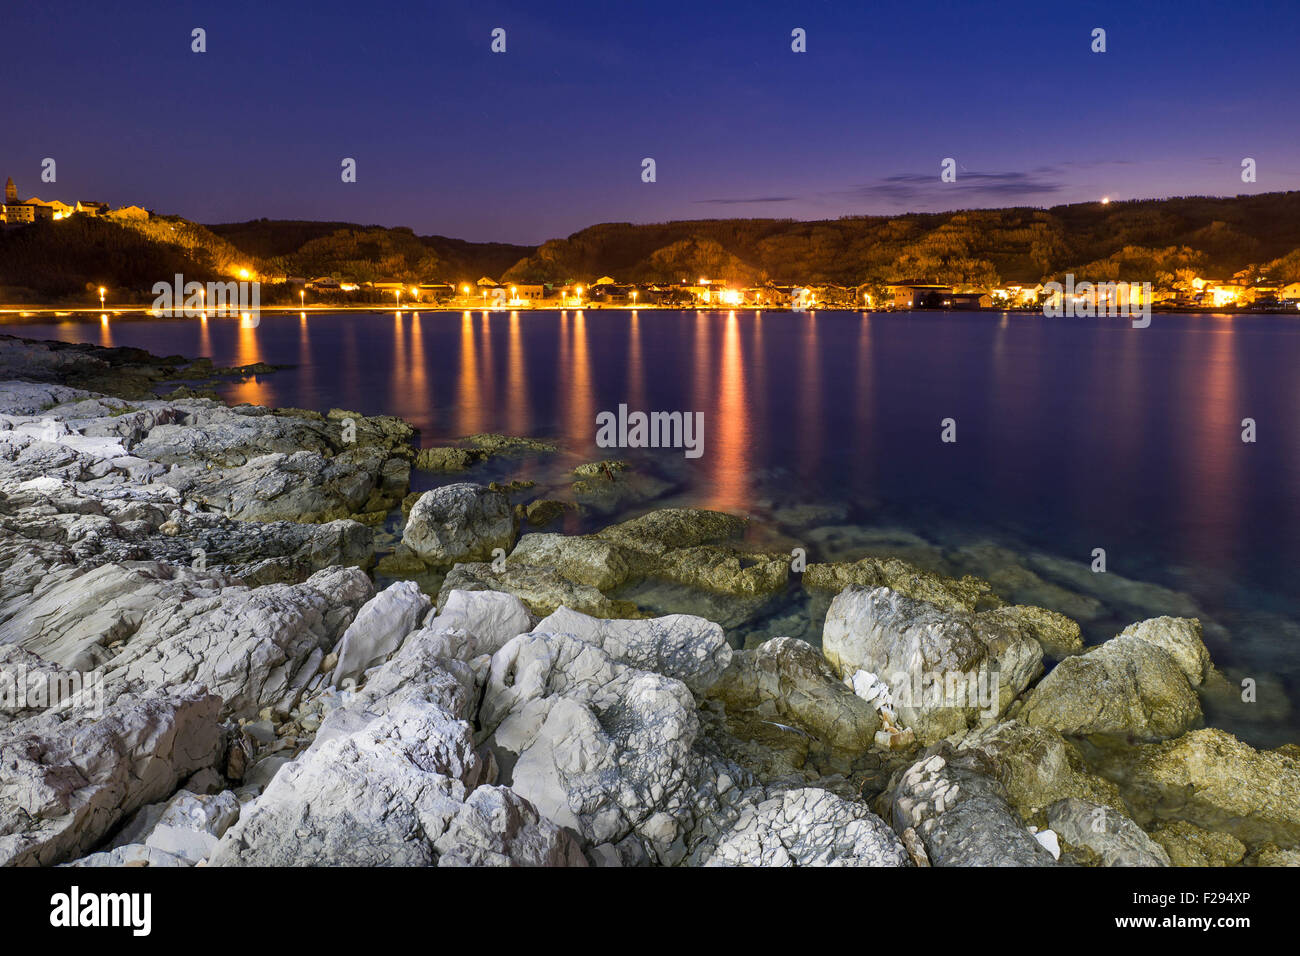 Coast of Susak at night, lights reflecting in the water Stock Photo